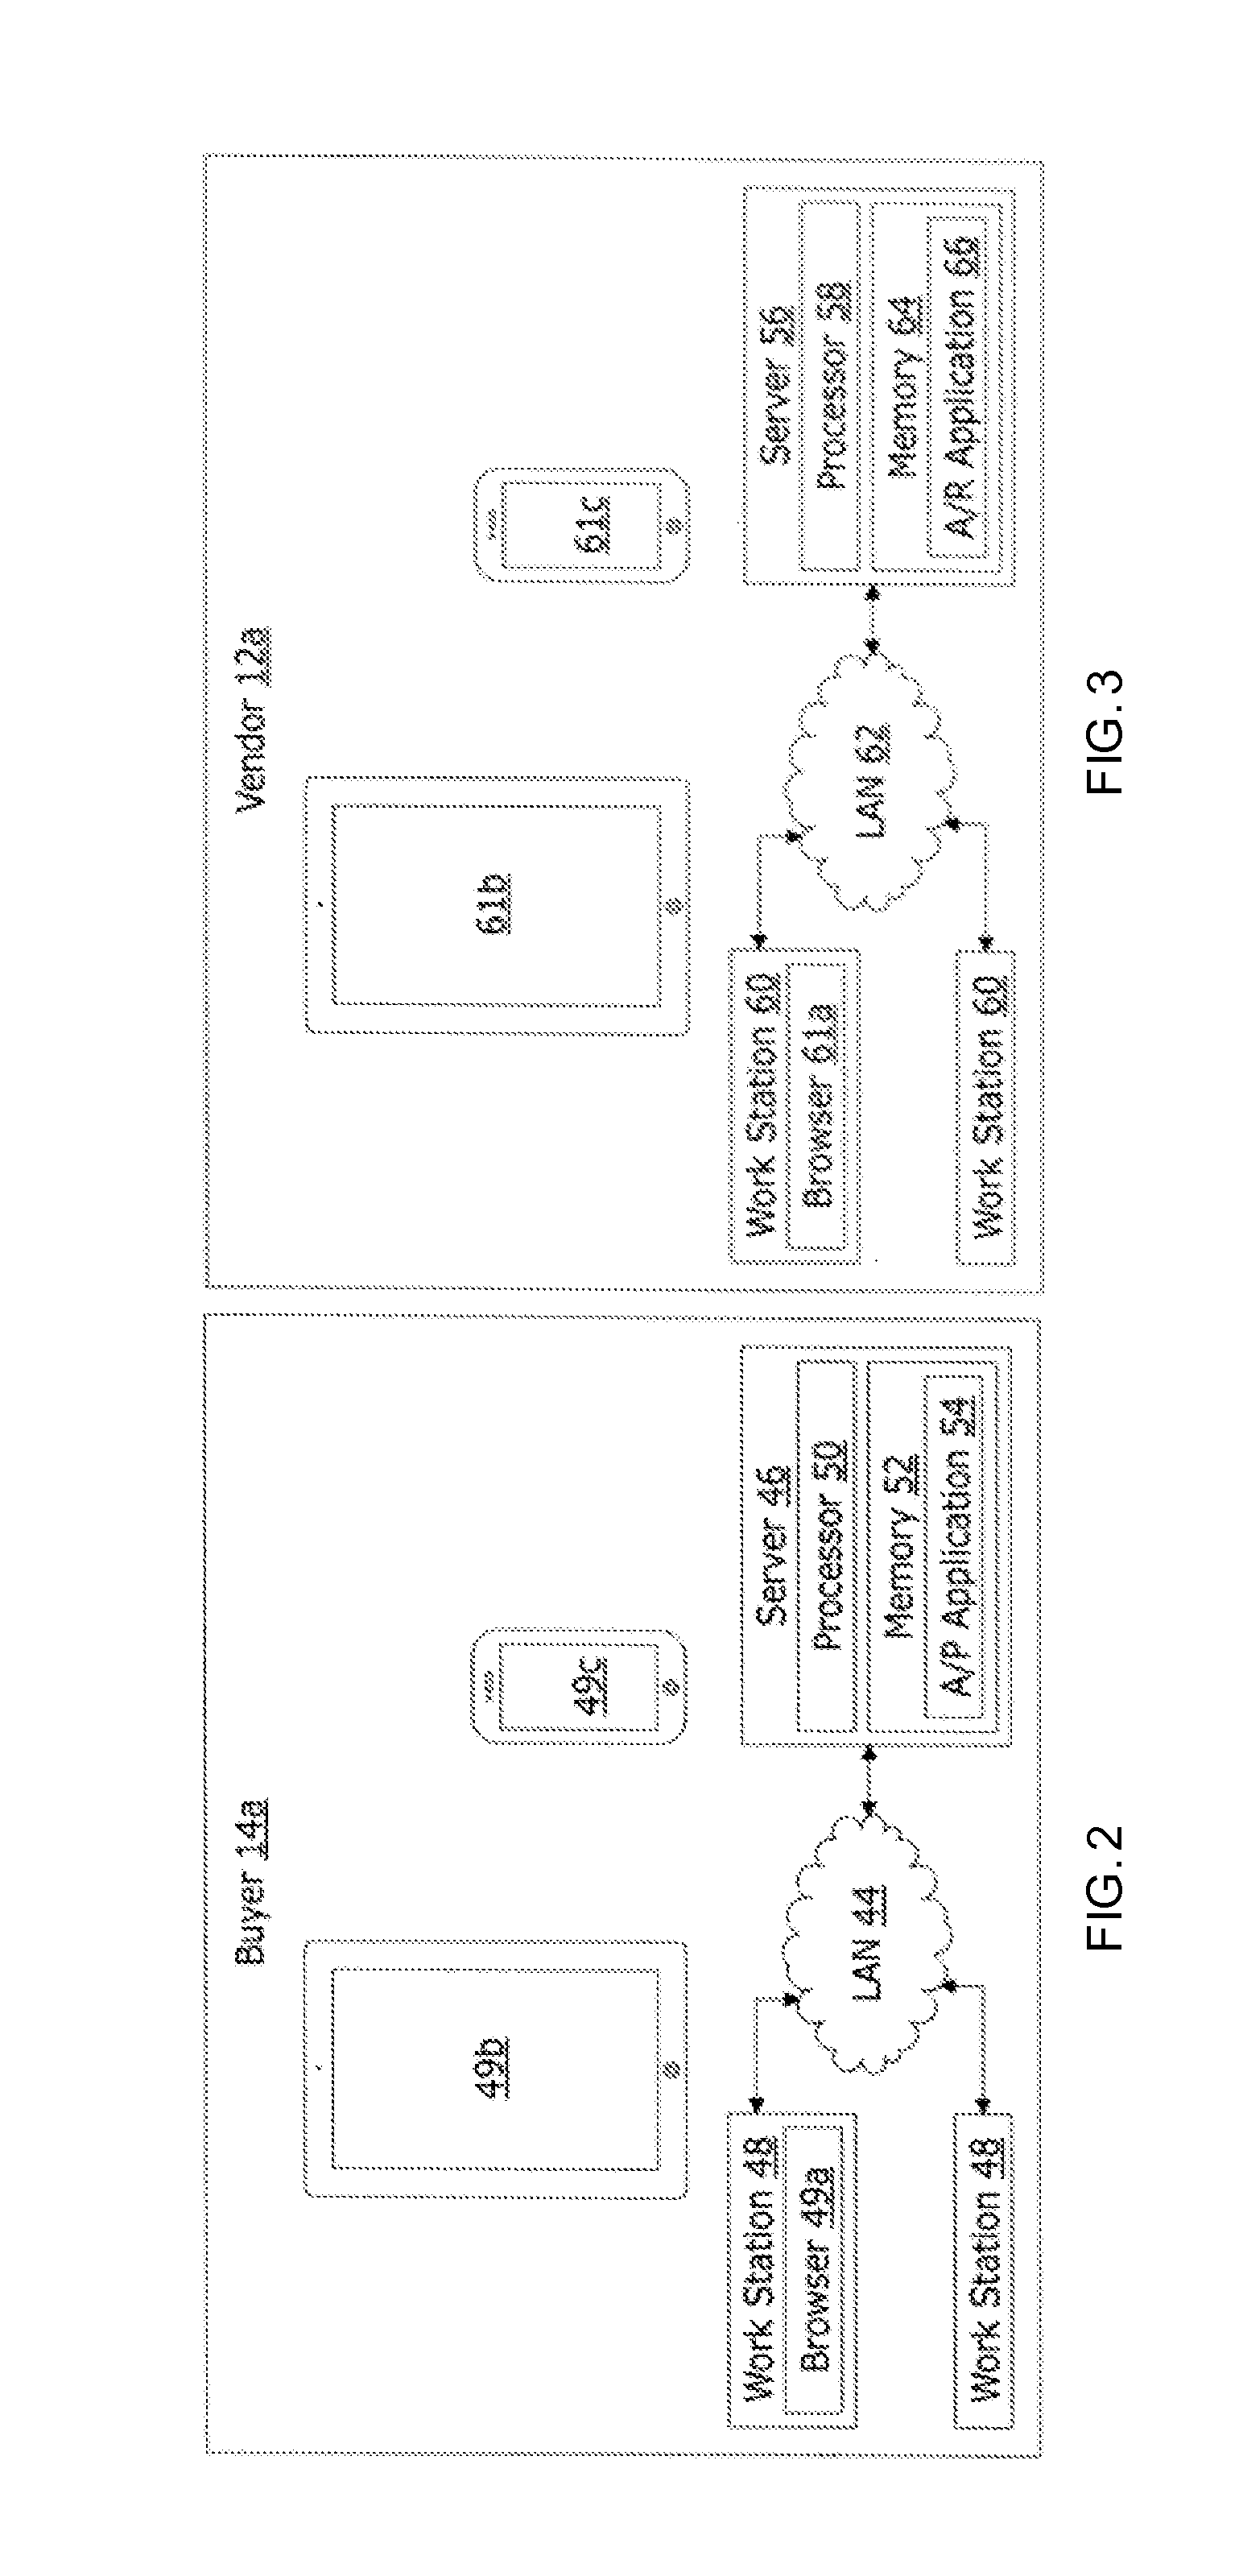 Automatic payment component for an electronic invoice payment system